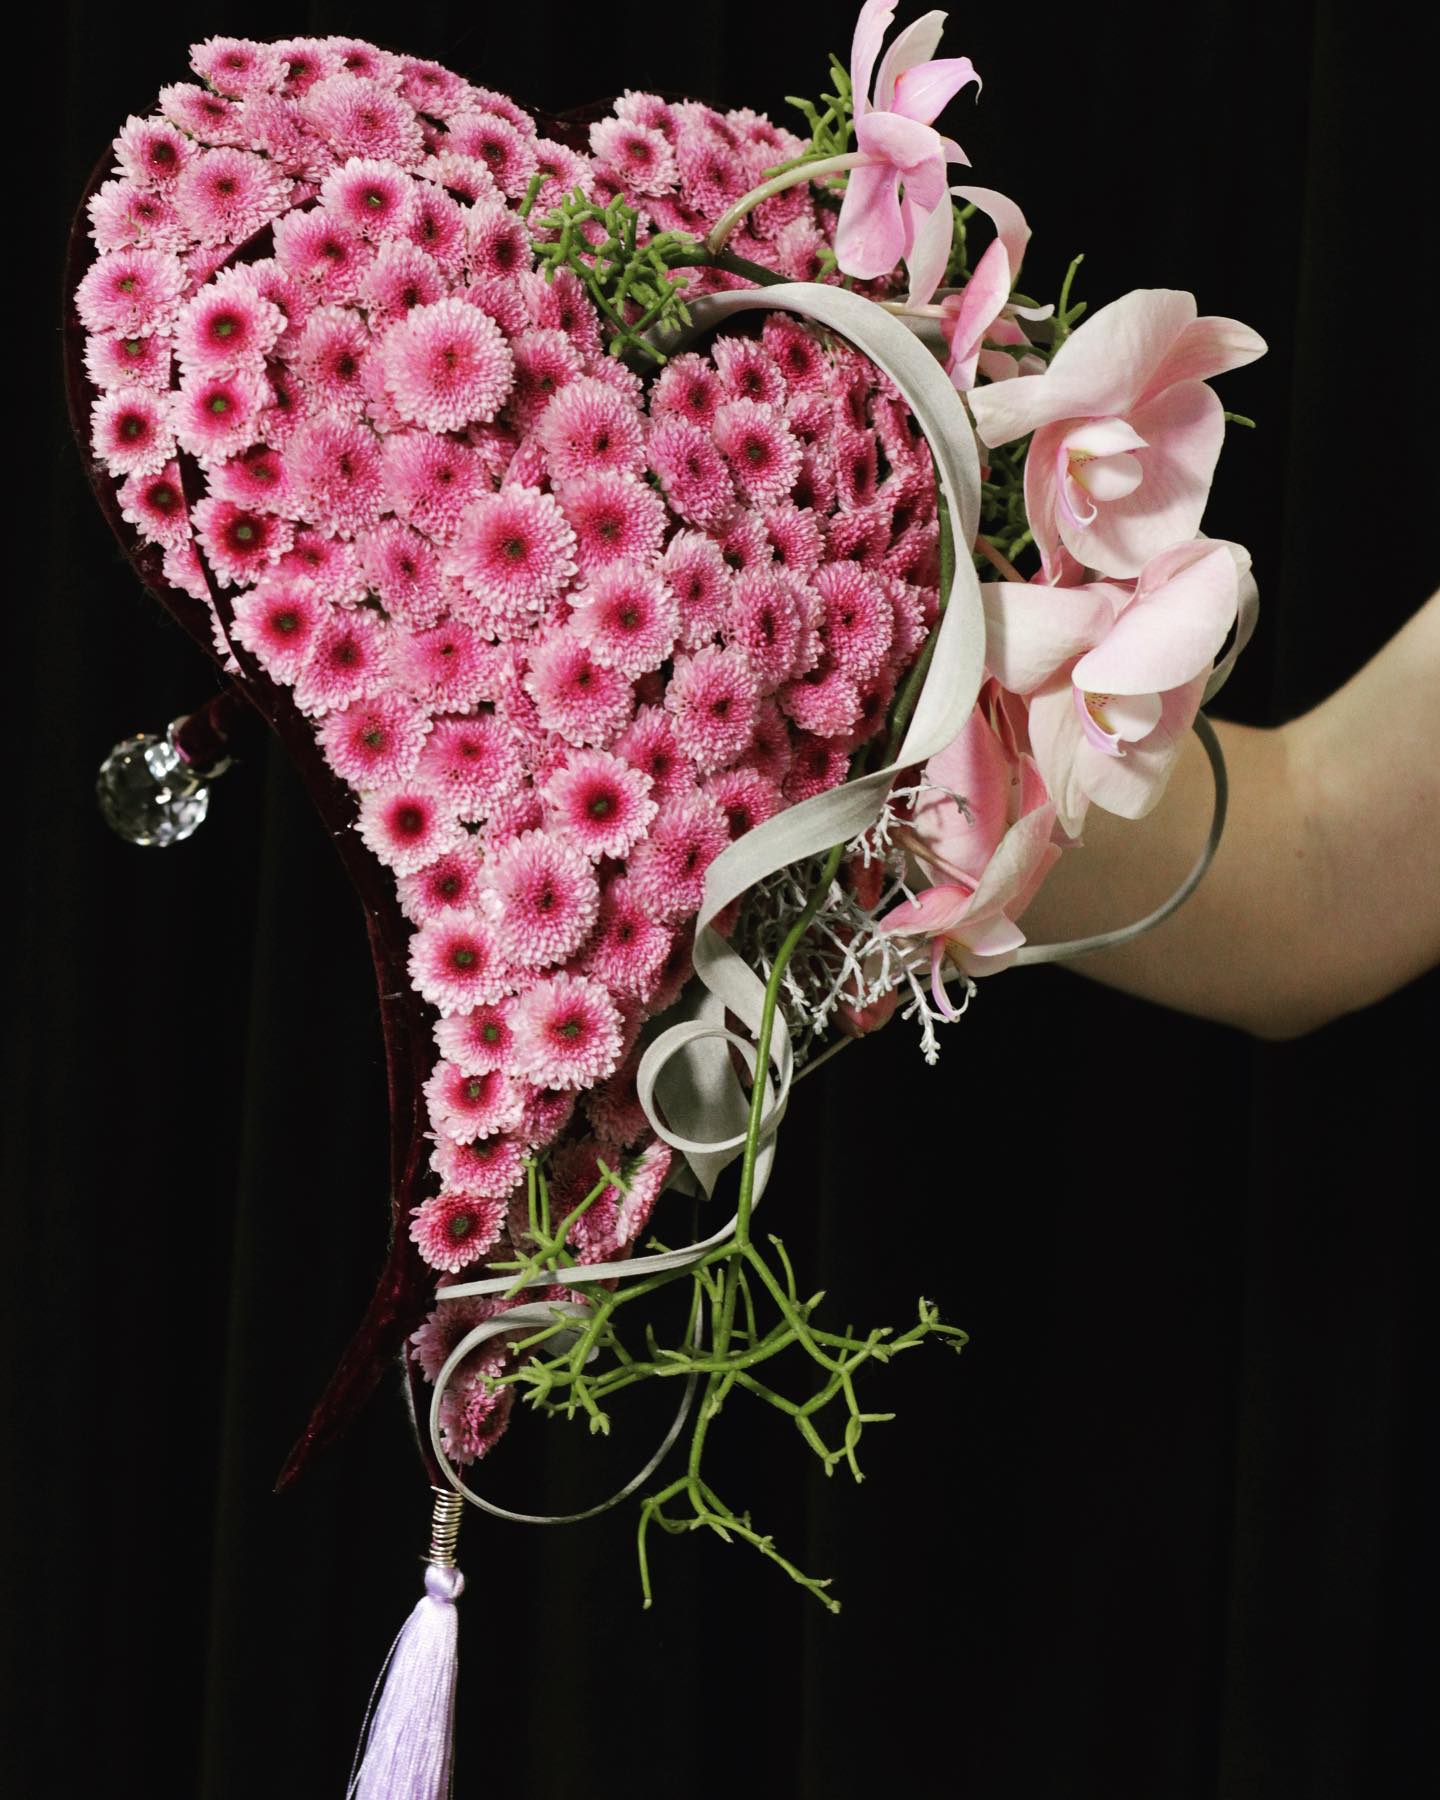 When Two Hearts Collide  - I Love to Design Wedding Flowers 3